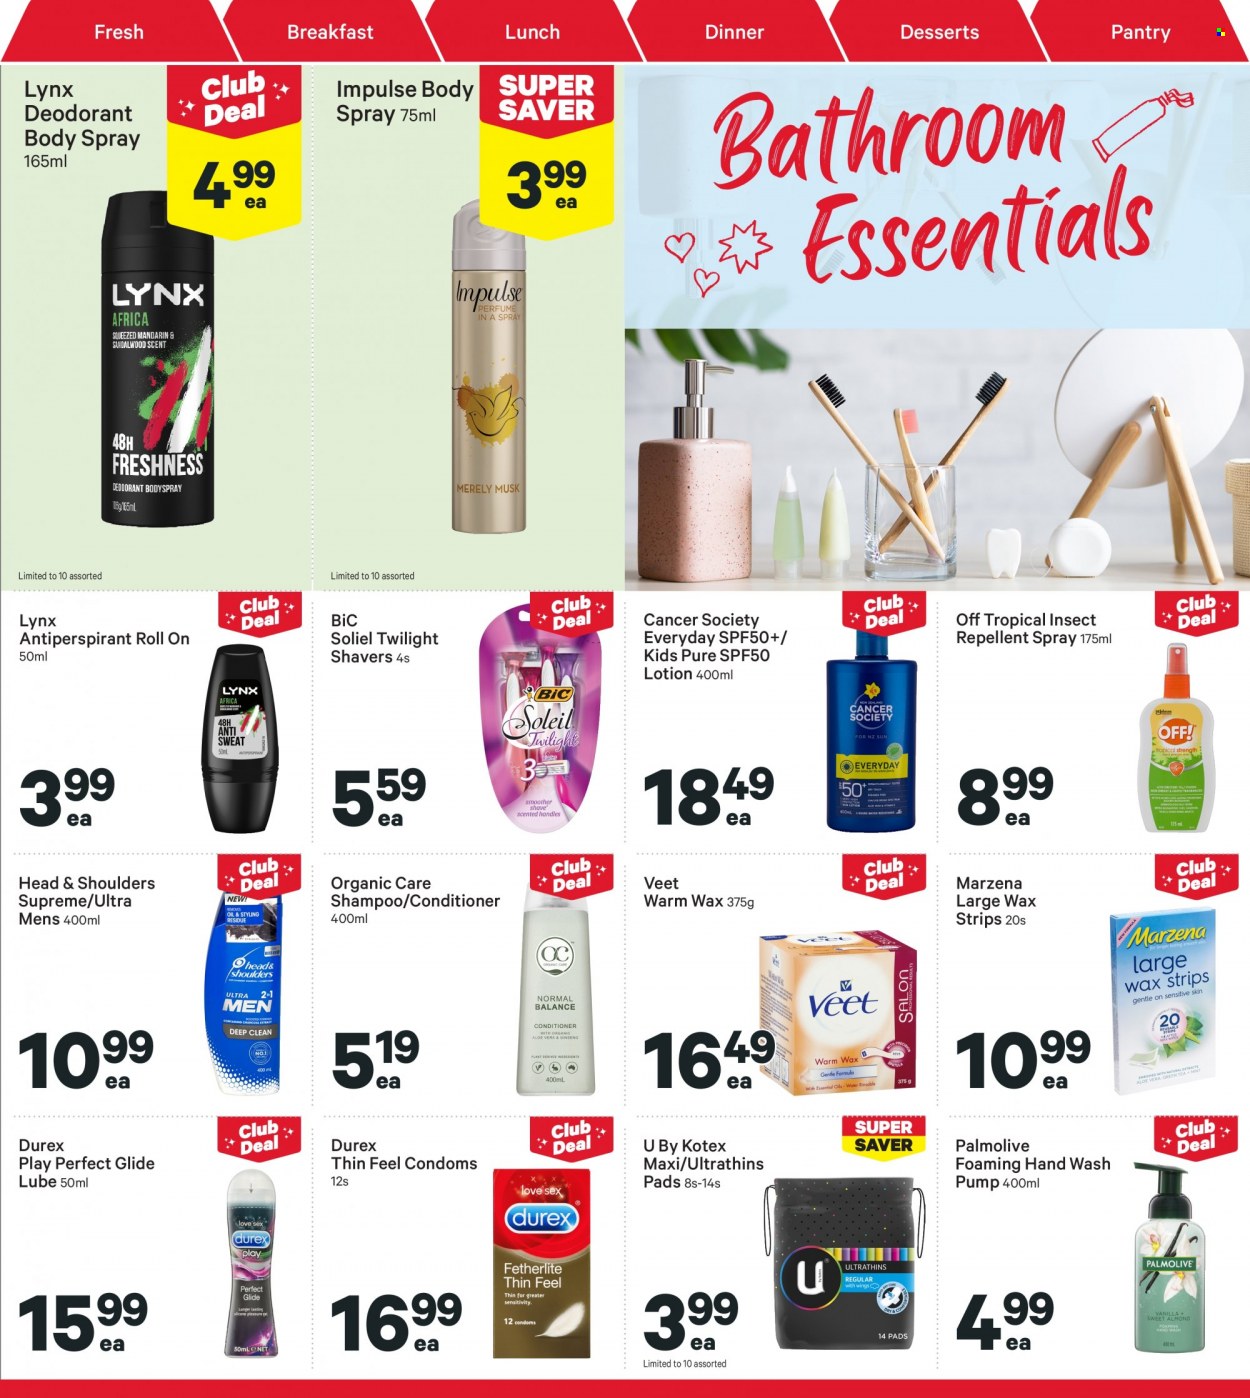 thumbnail - New World mailer - 30.01.2023 - 05.02.2023 - Sales products - mandarines, oil, tea, shampoo, hand wash, Palmolive, Kotex, conditioner, Head & Shoulders, body lotion, body spray, anti-perspirant, roll-on, deodorant, BIC, Veet, wax strips, repellent, spatula, essential oils, ginseng. Page 29.